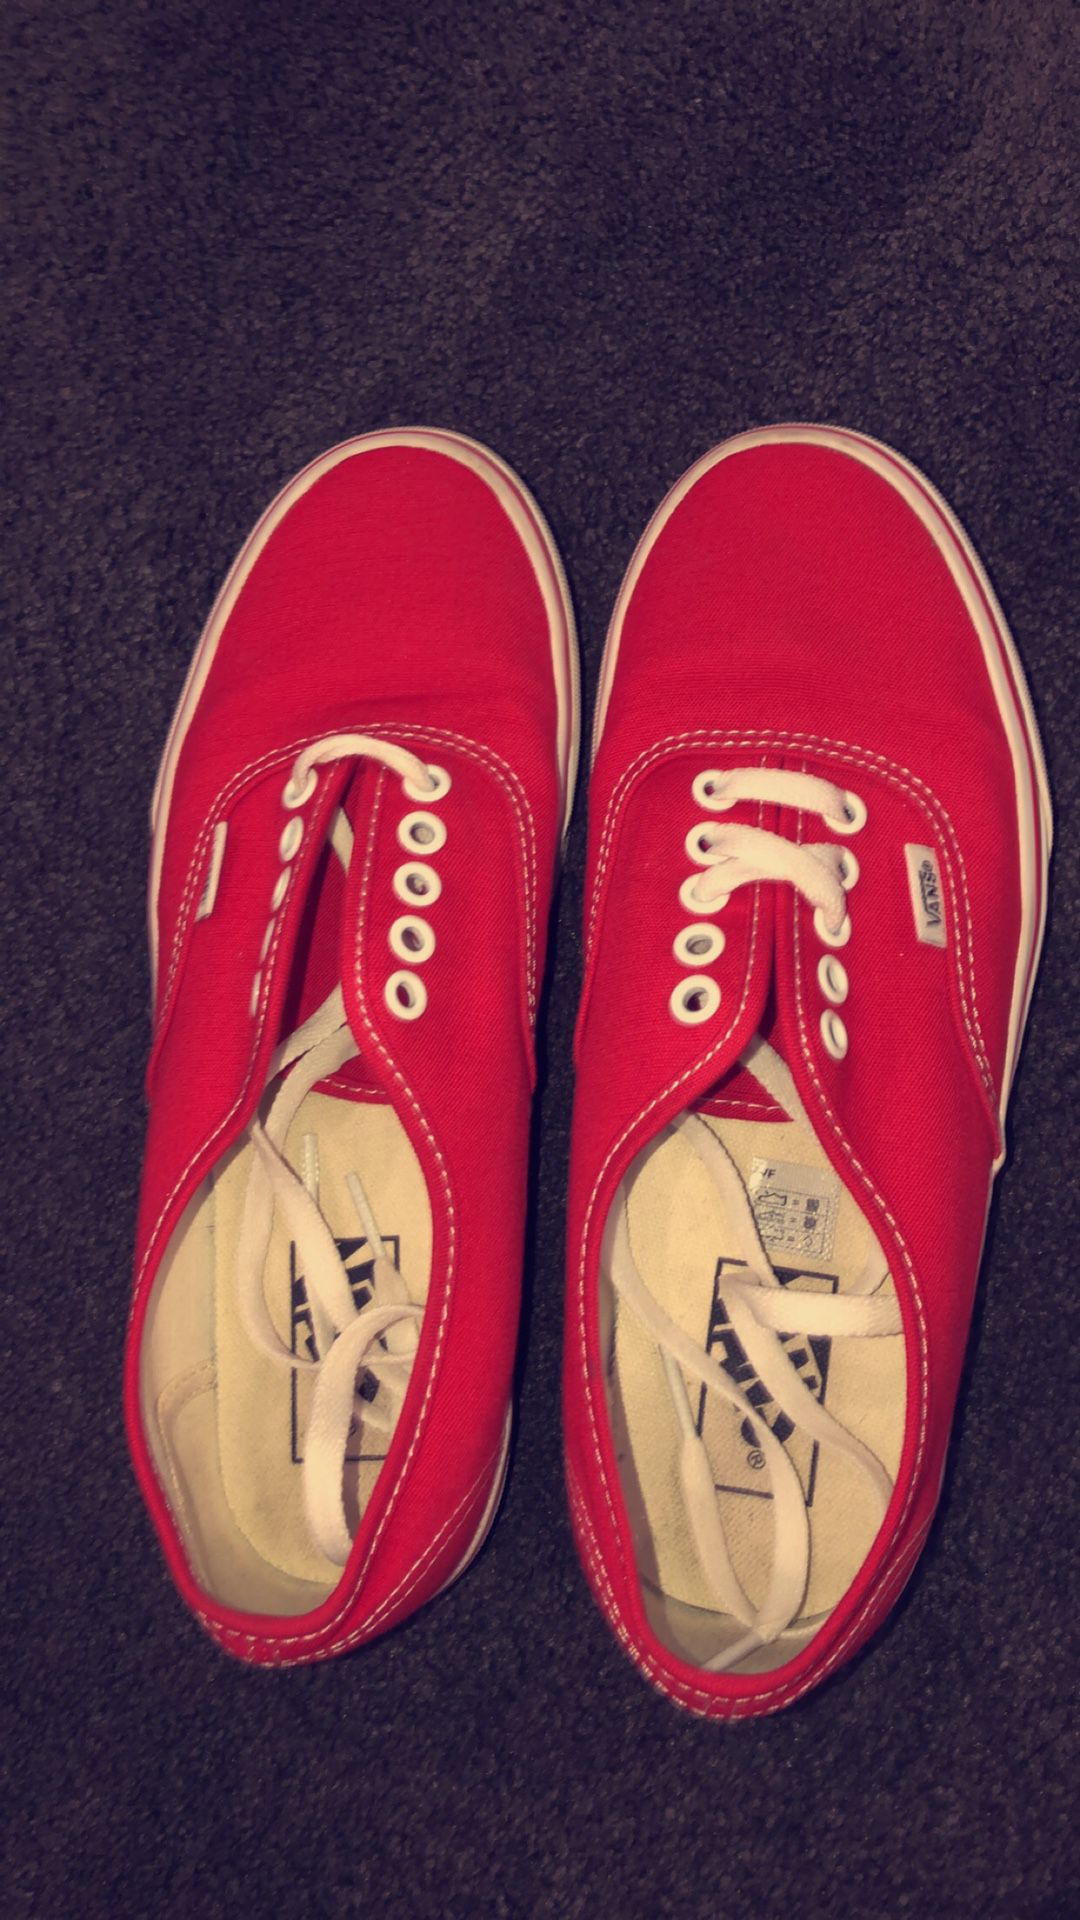 brand new red vans in size 7